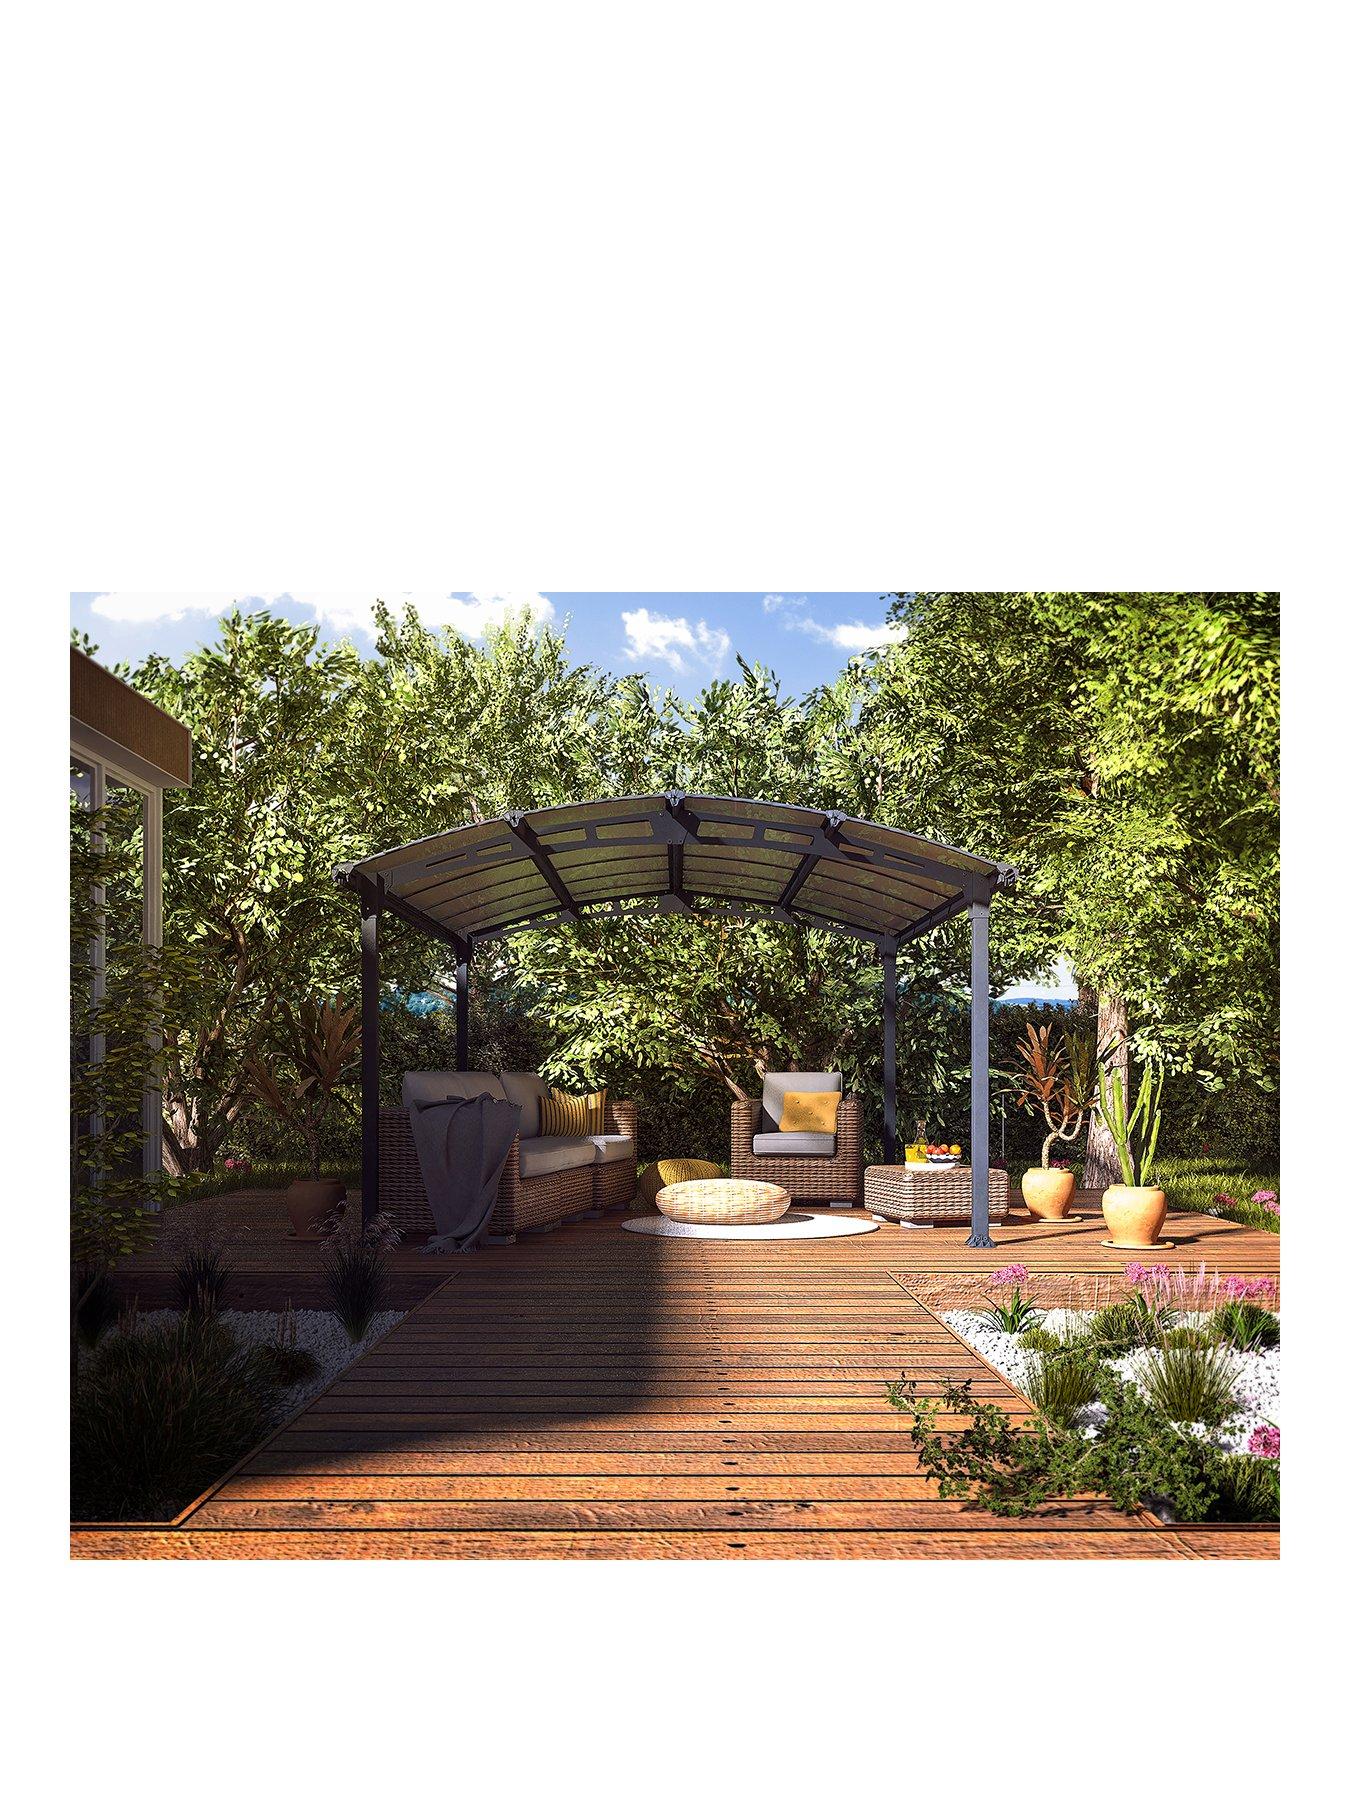 Details about   2.4m Triangle Canopy Sun Shade Sail Water Resistant UV Block Patio Awning Garden 